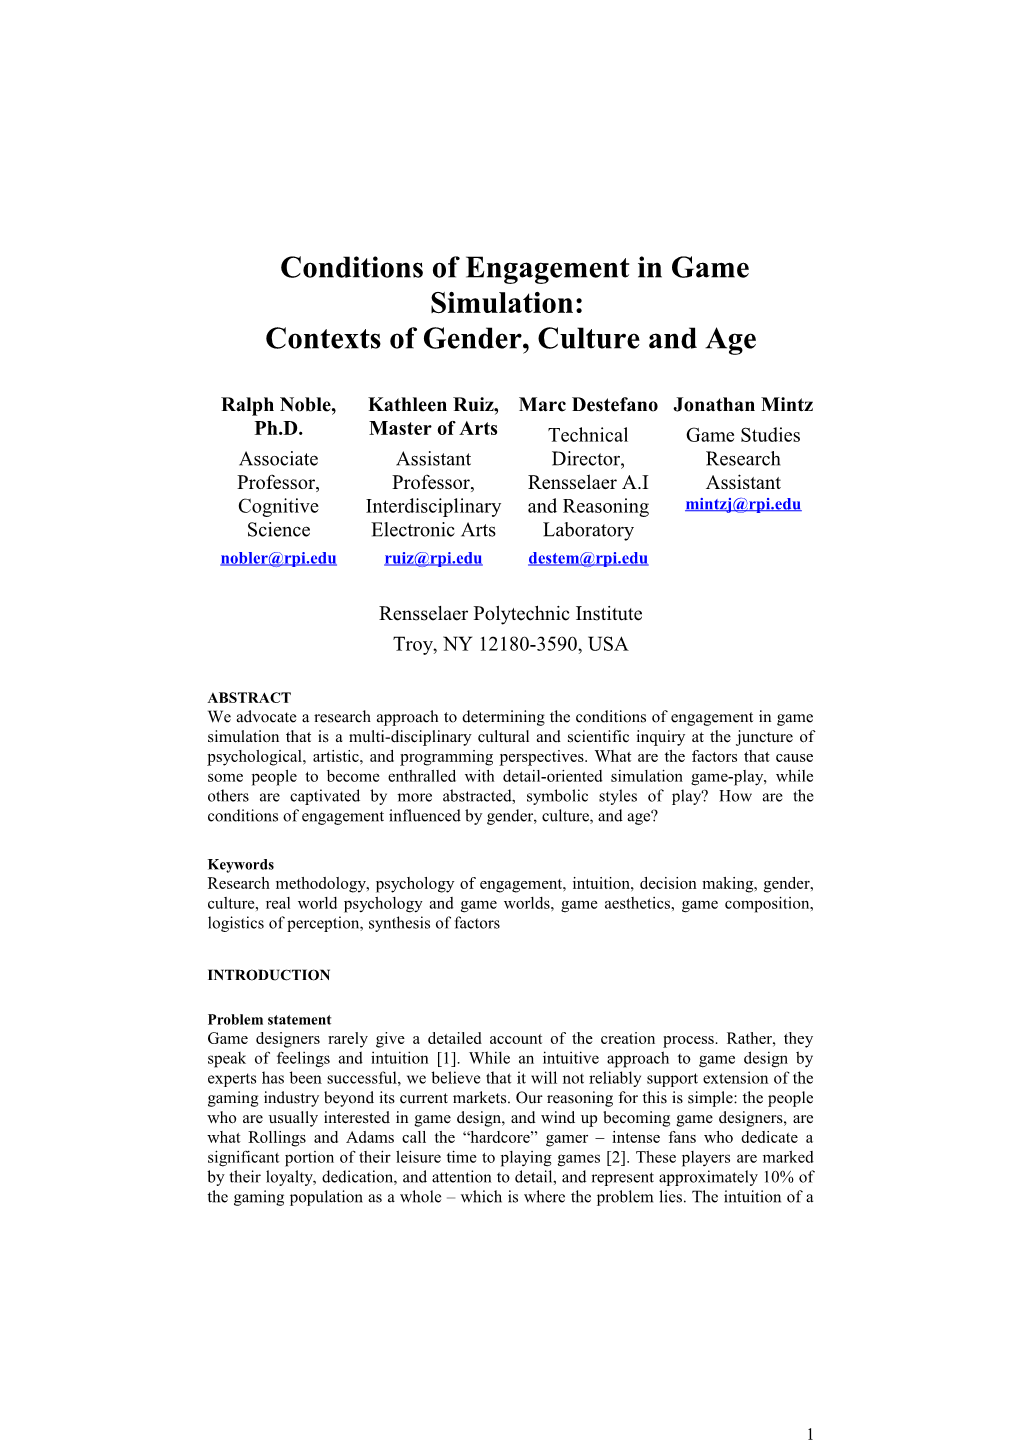 Conditions of Engagement in Game Simulation: Contexts of Gender, Culture and Age